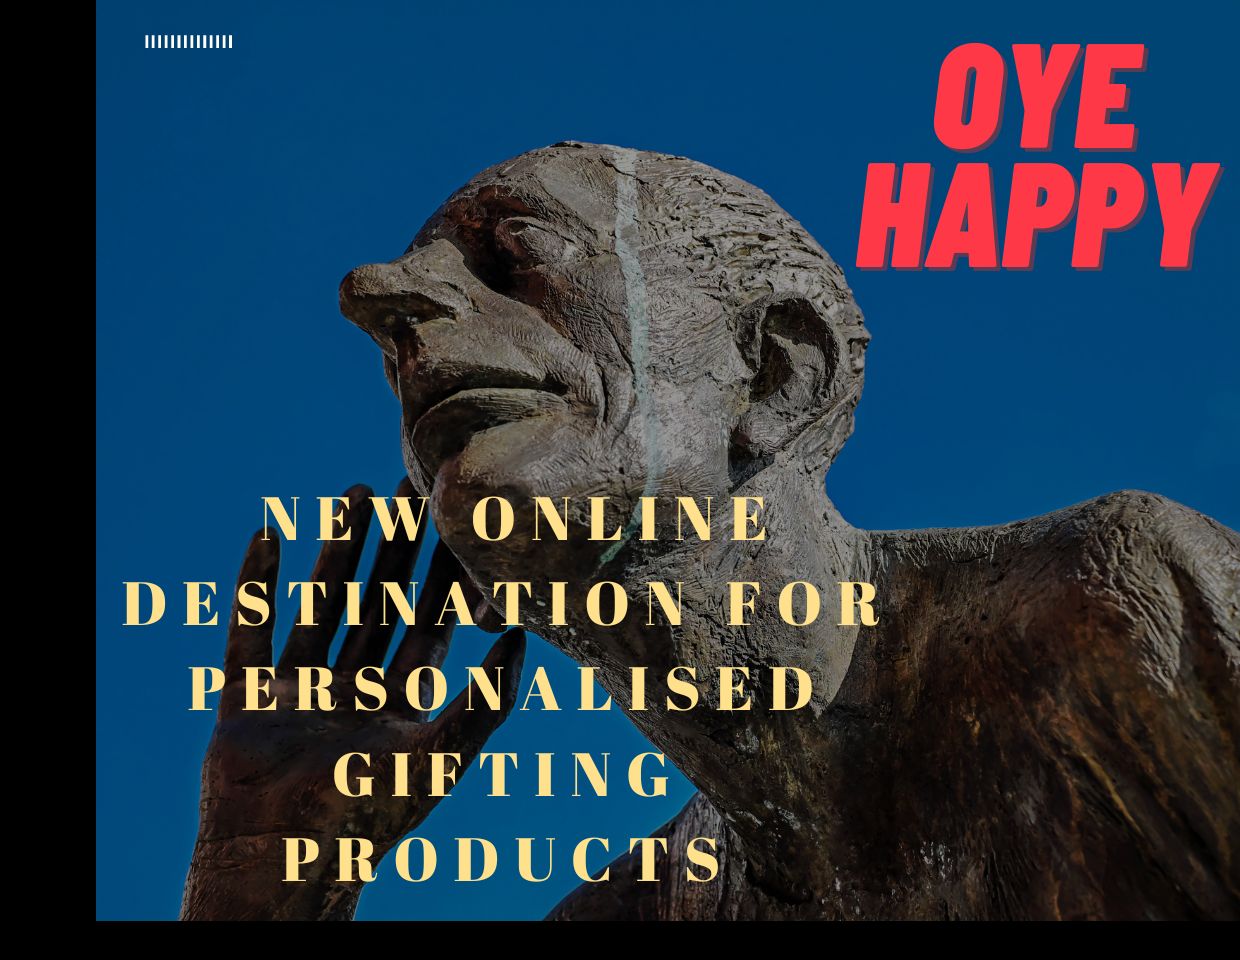 happy-newonline-destination-personailed-gifting-product